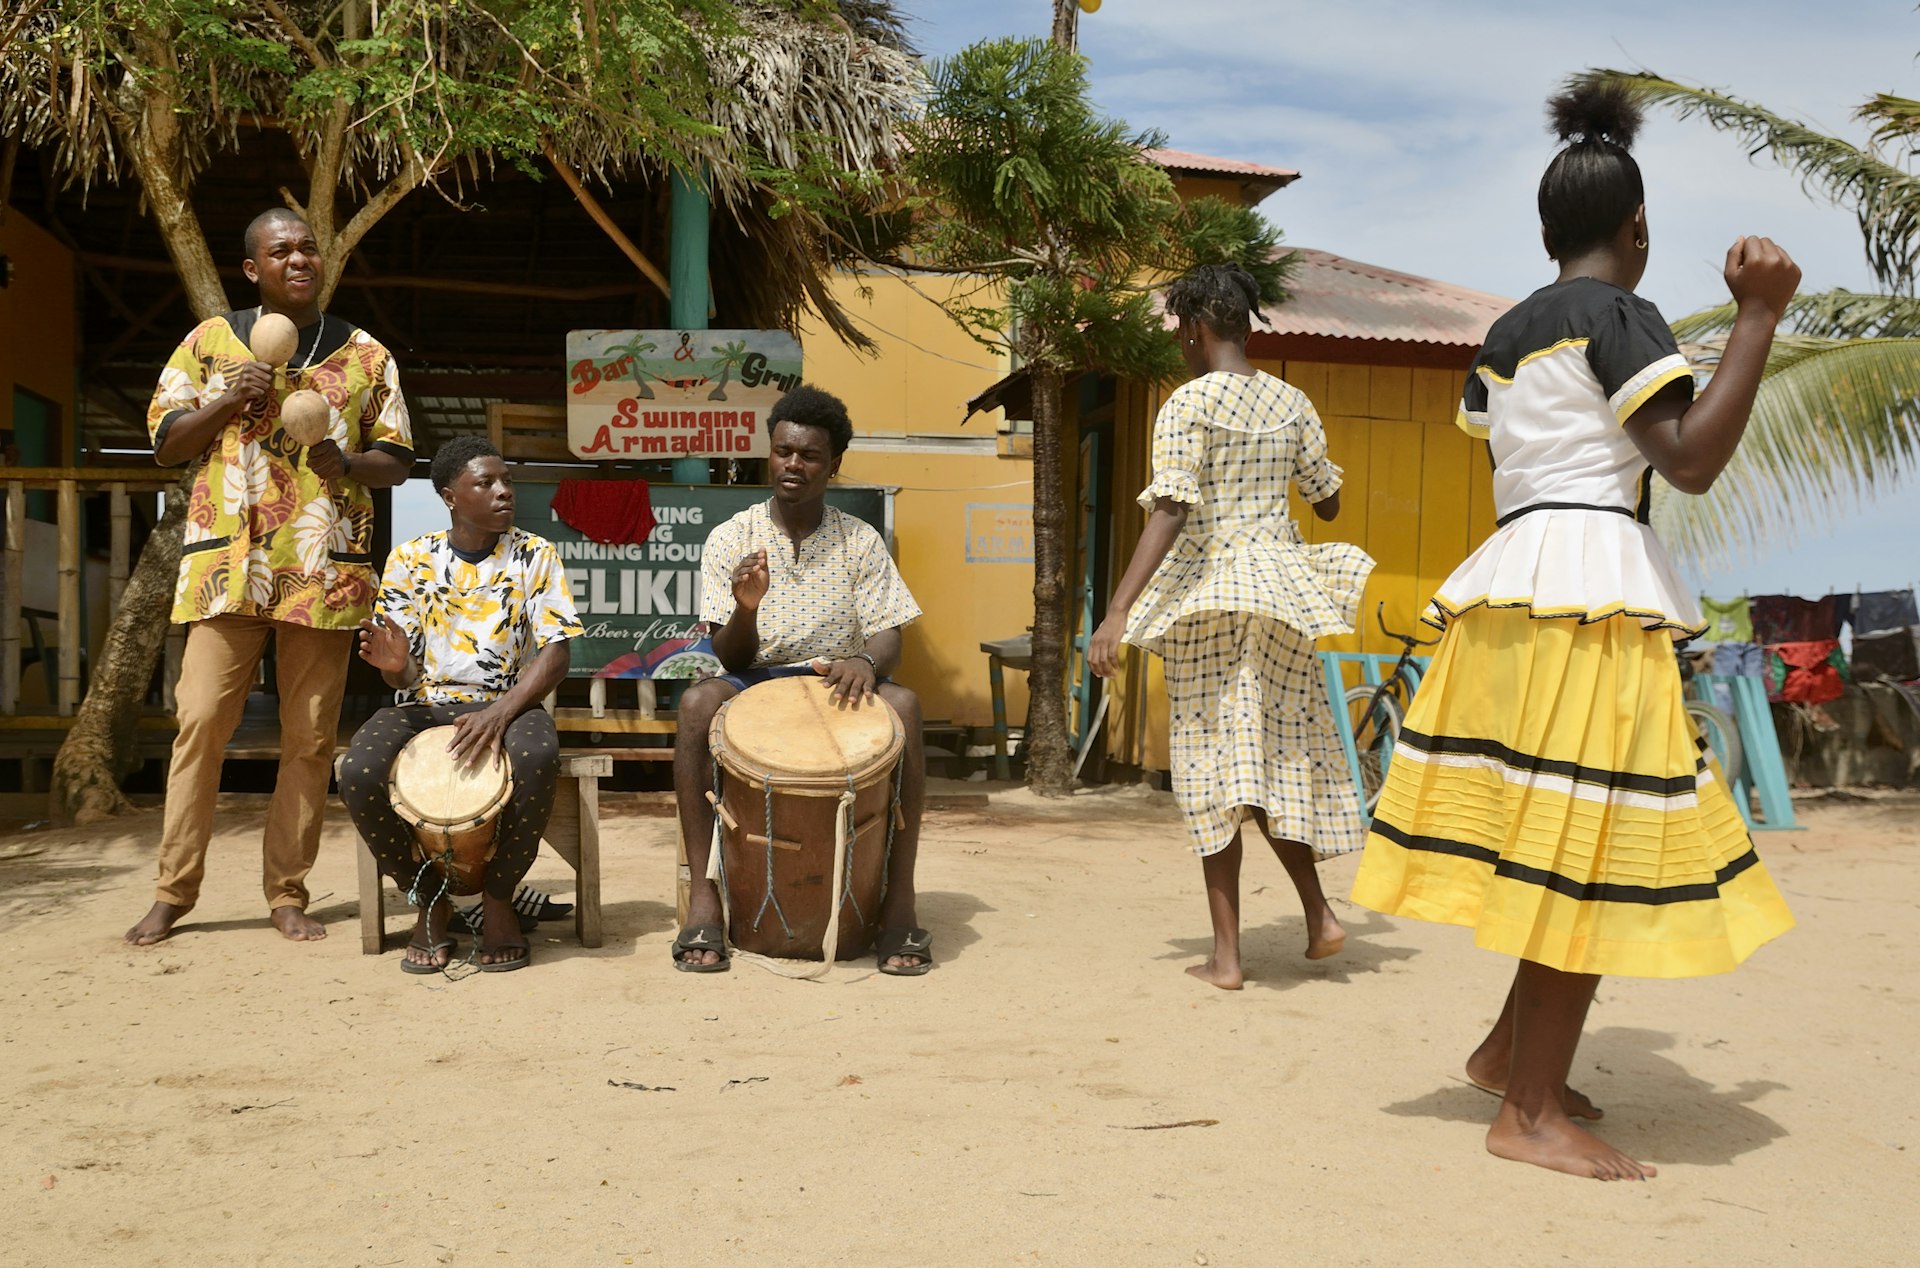 A Garifuna troupe performs traditional songs with drumming and dancing in Hopkins Village